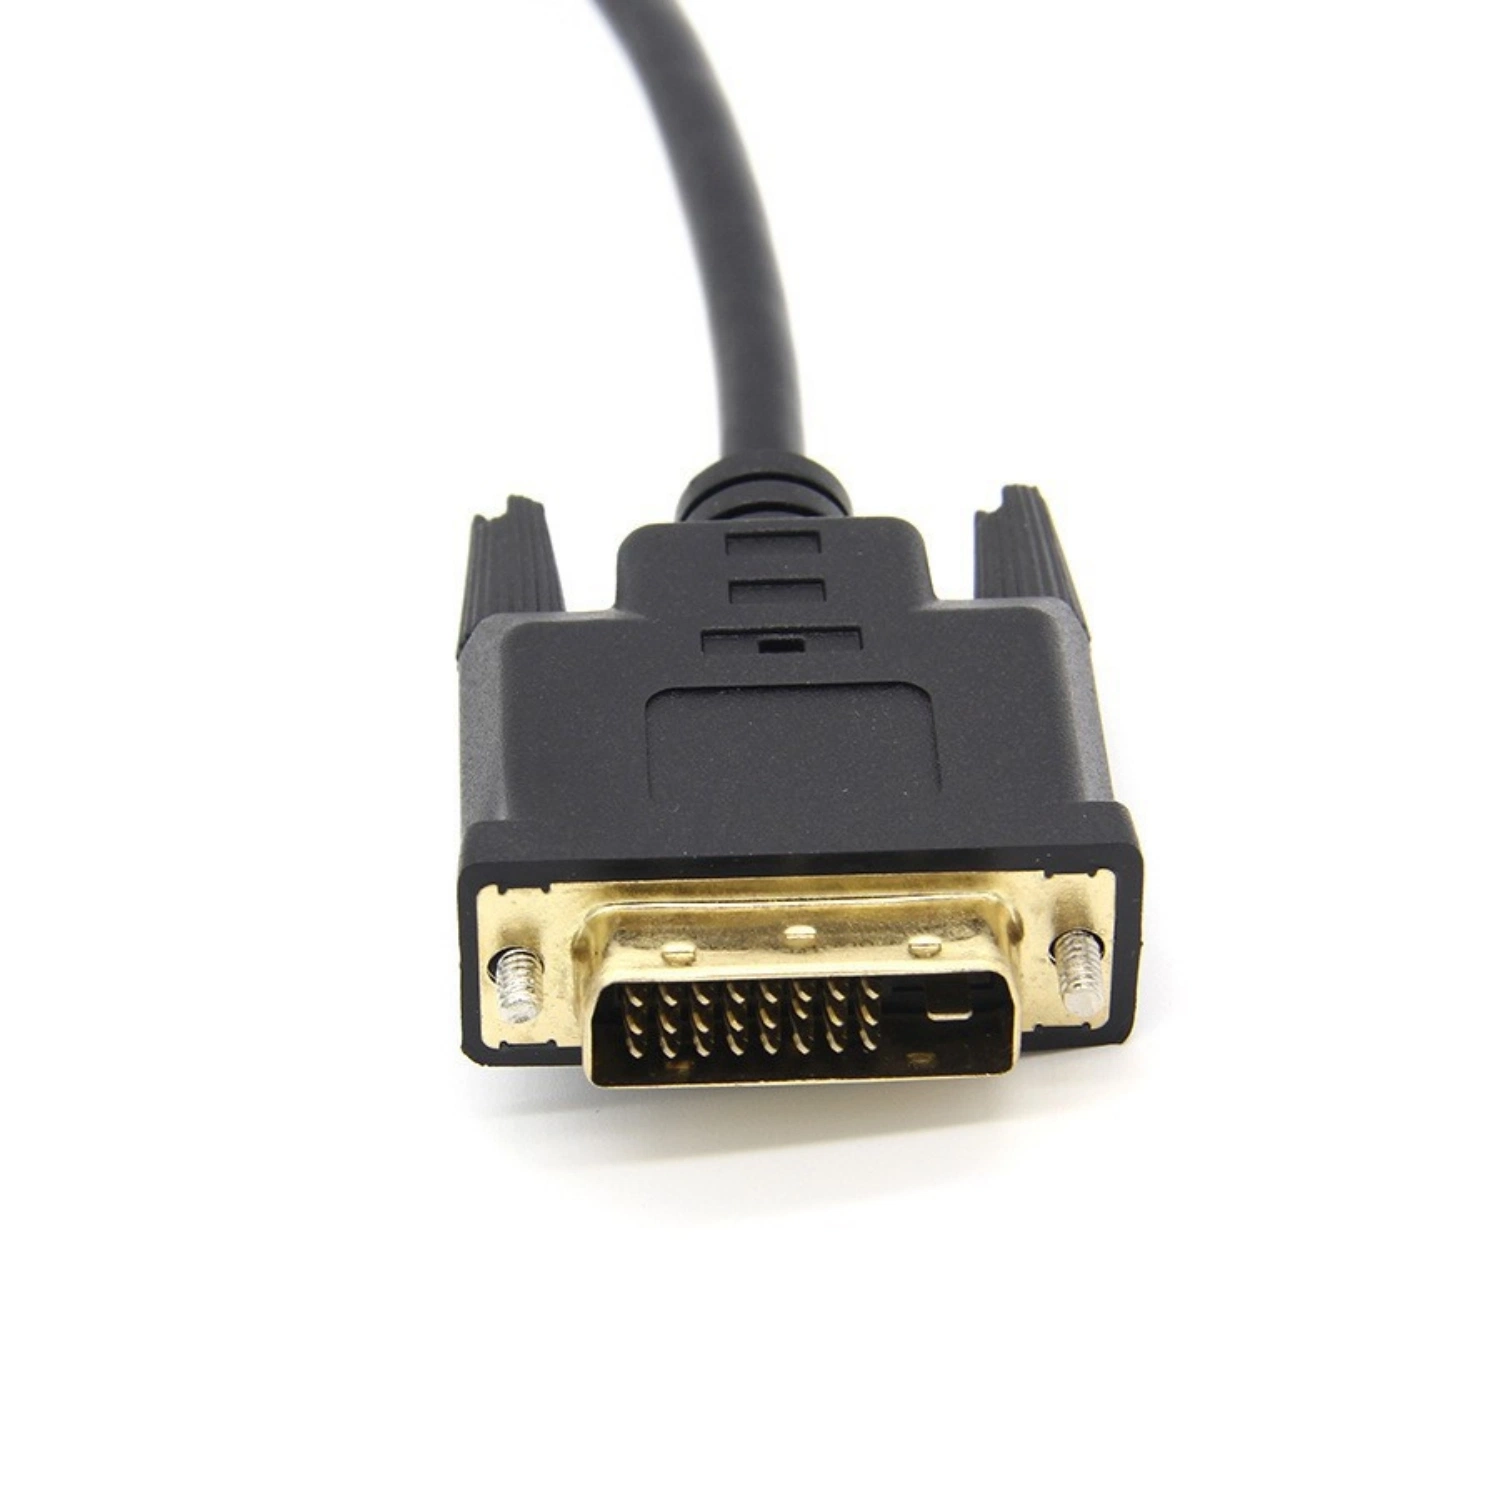 Two-Way Inter-Conversion High-Definition Cable HDMI to DVI Converter